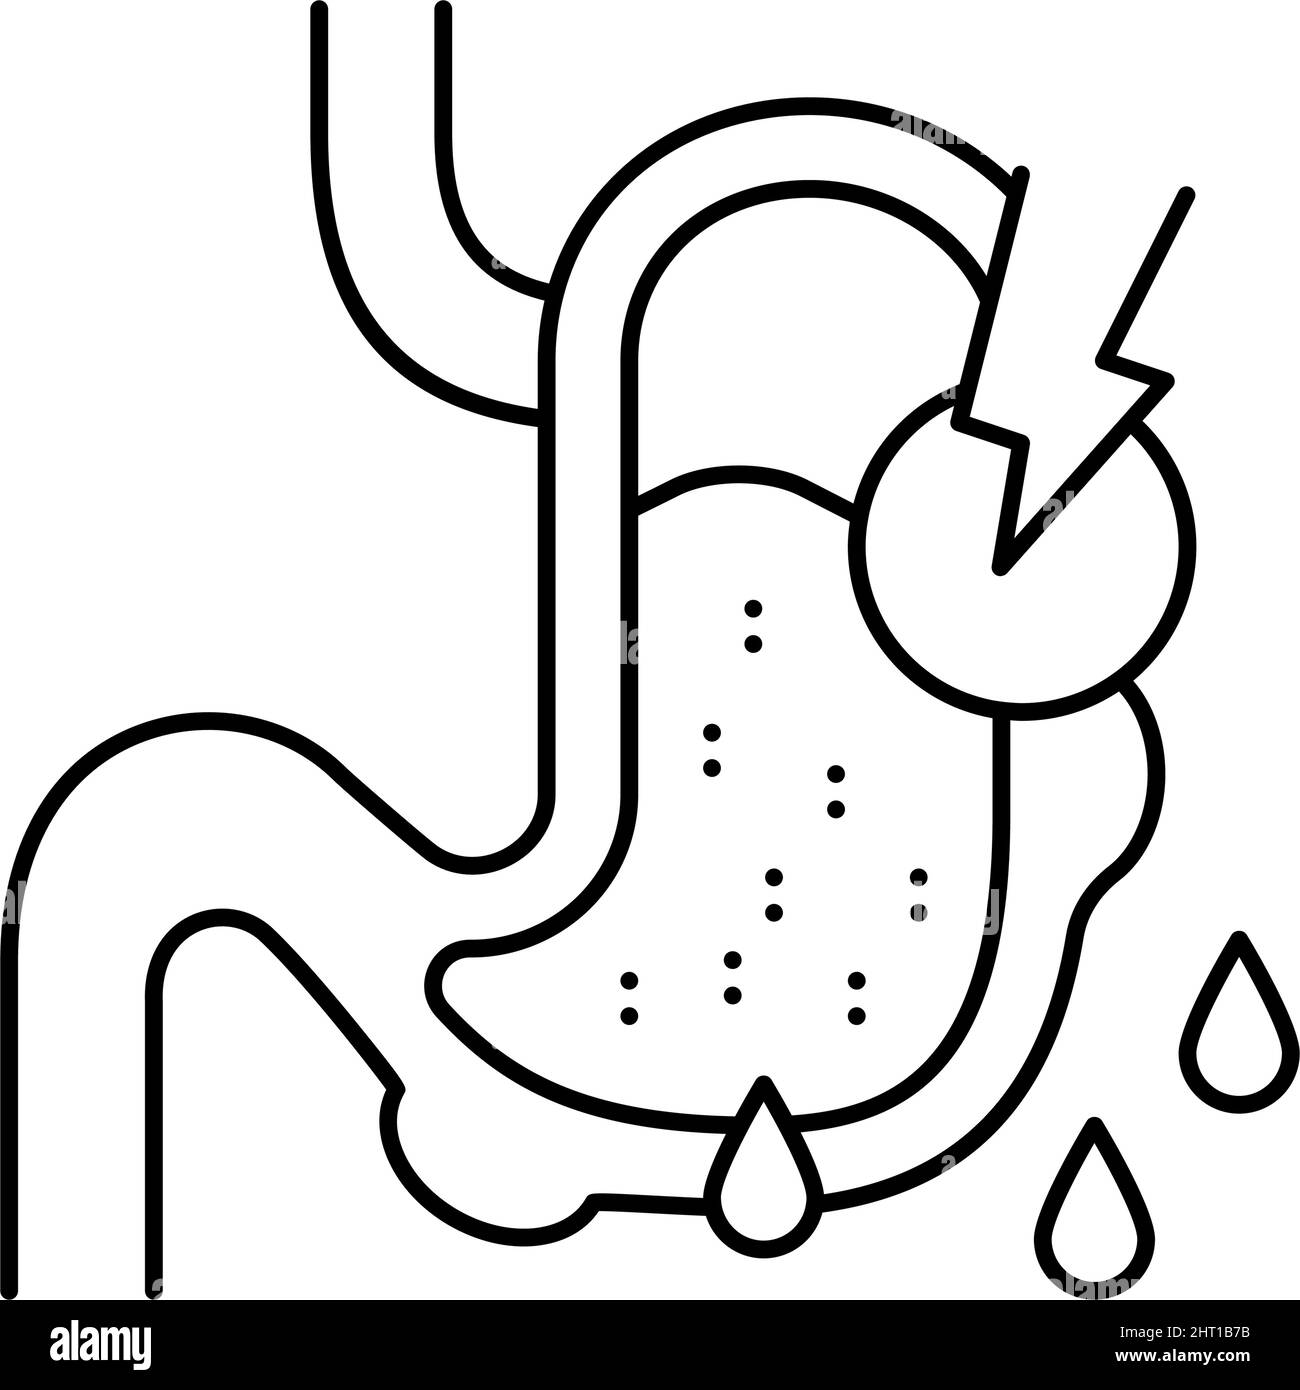 leaks in gastrointestinal system line icon vector illustration Stock Vector